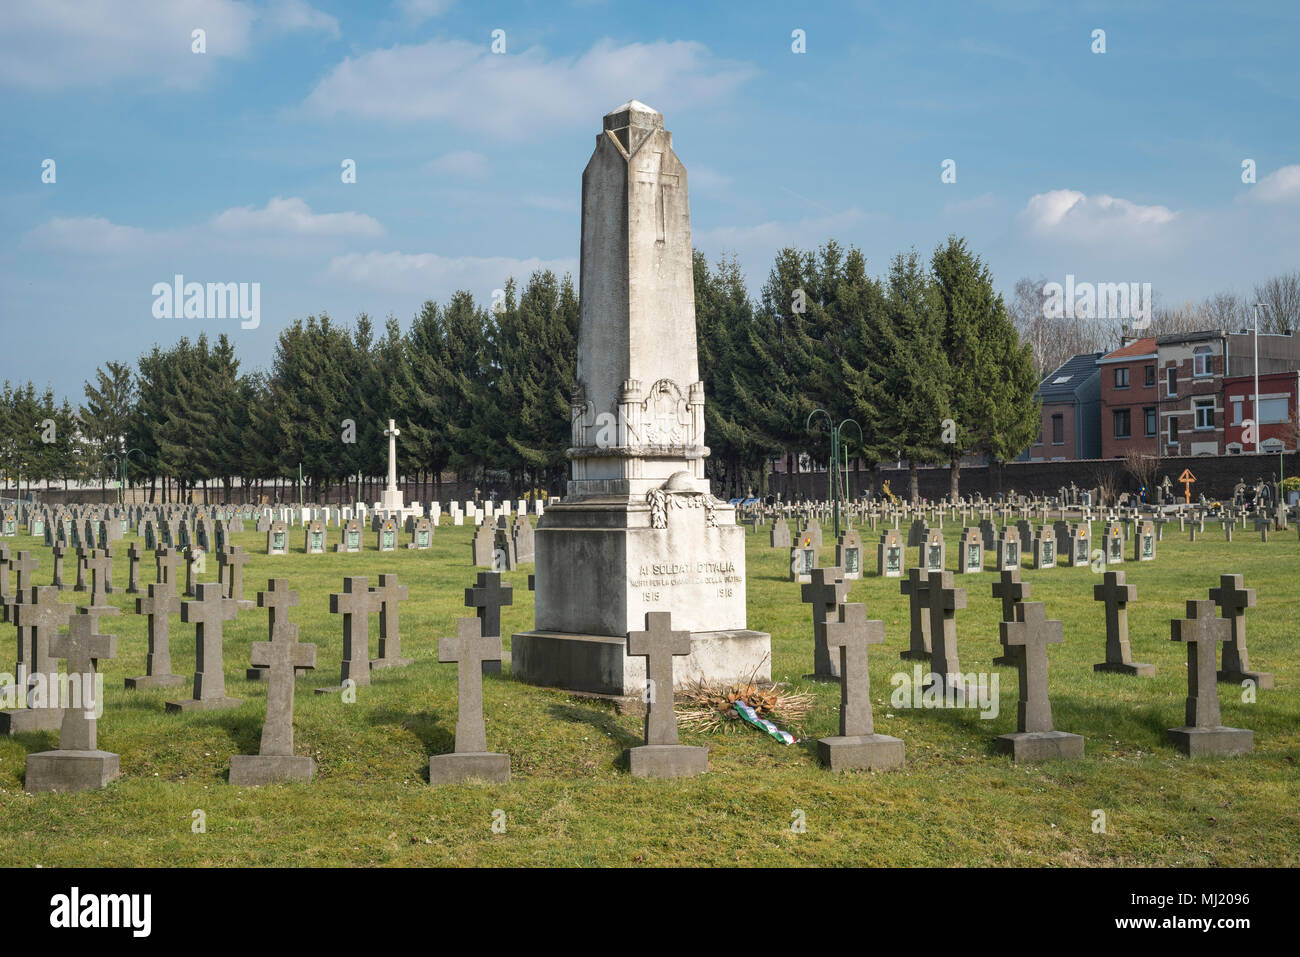 Italian military cemetery, obelisk and crosses, conquest of Liège was the first major offensive operation, World War I, Liège Stock Photo